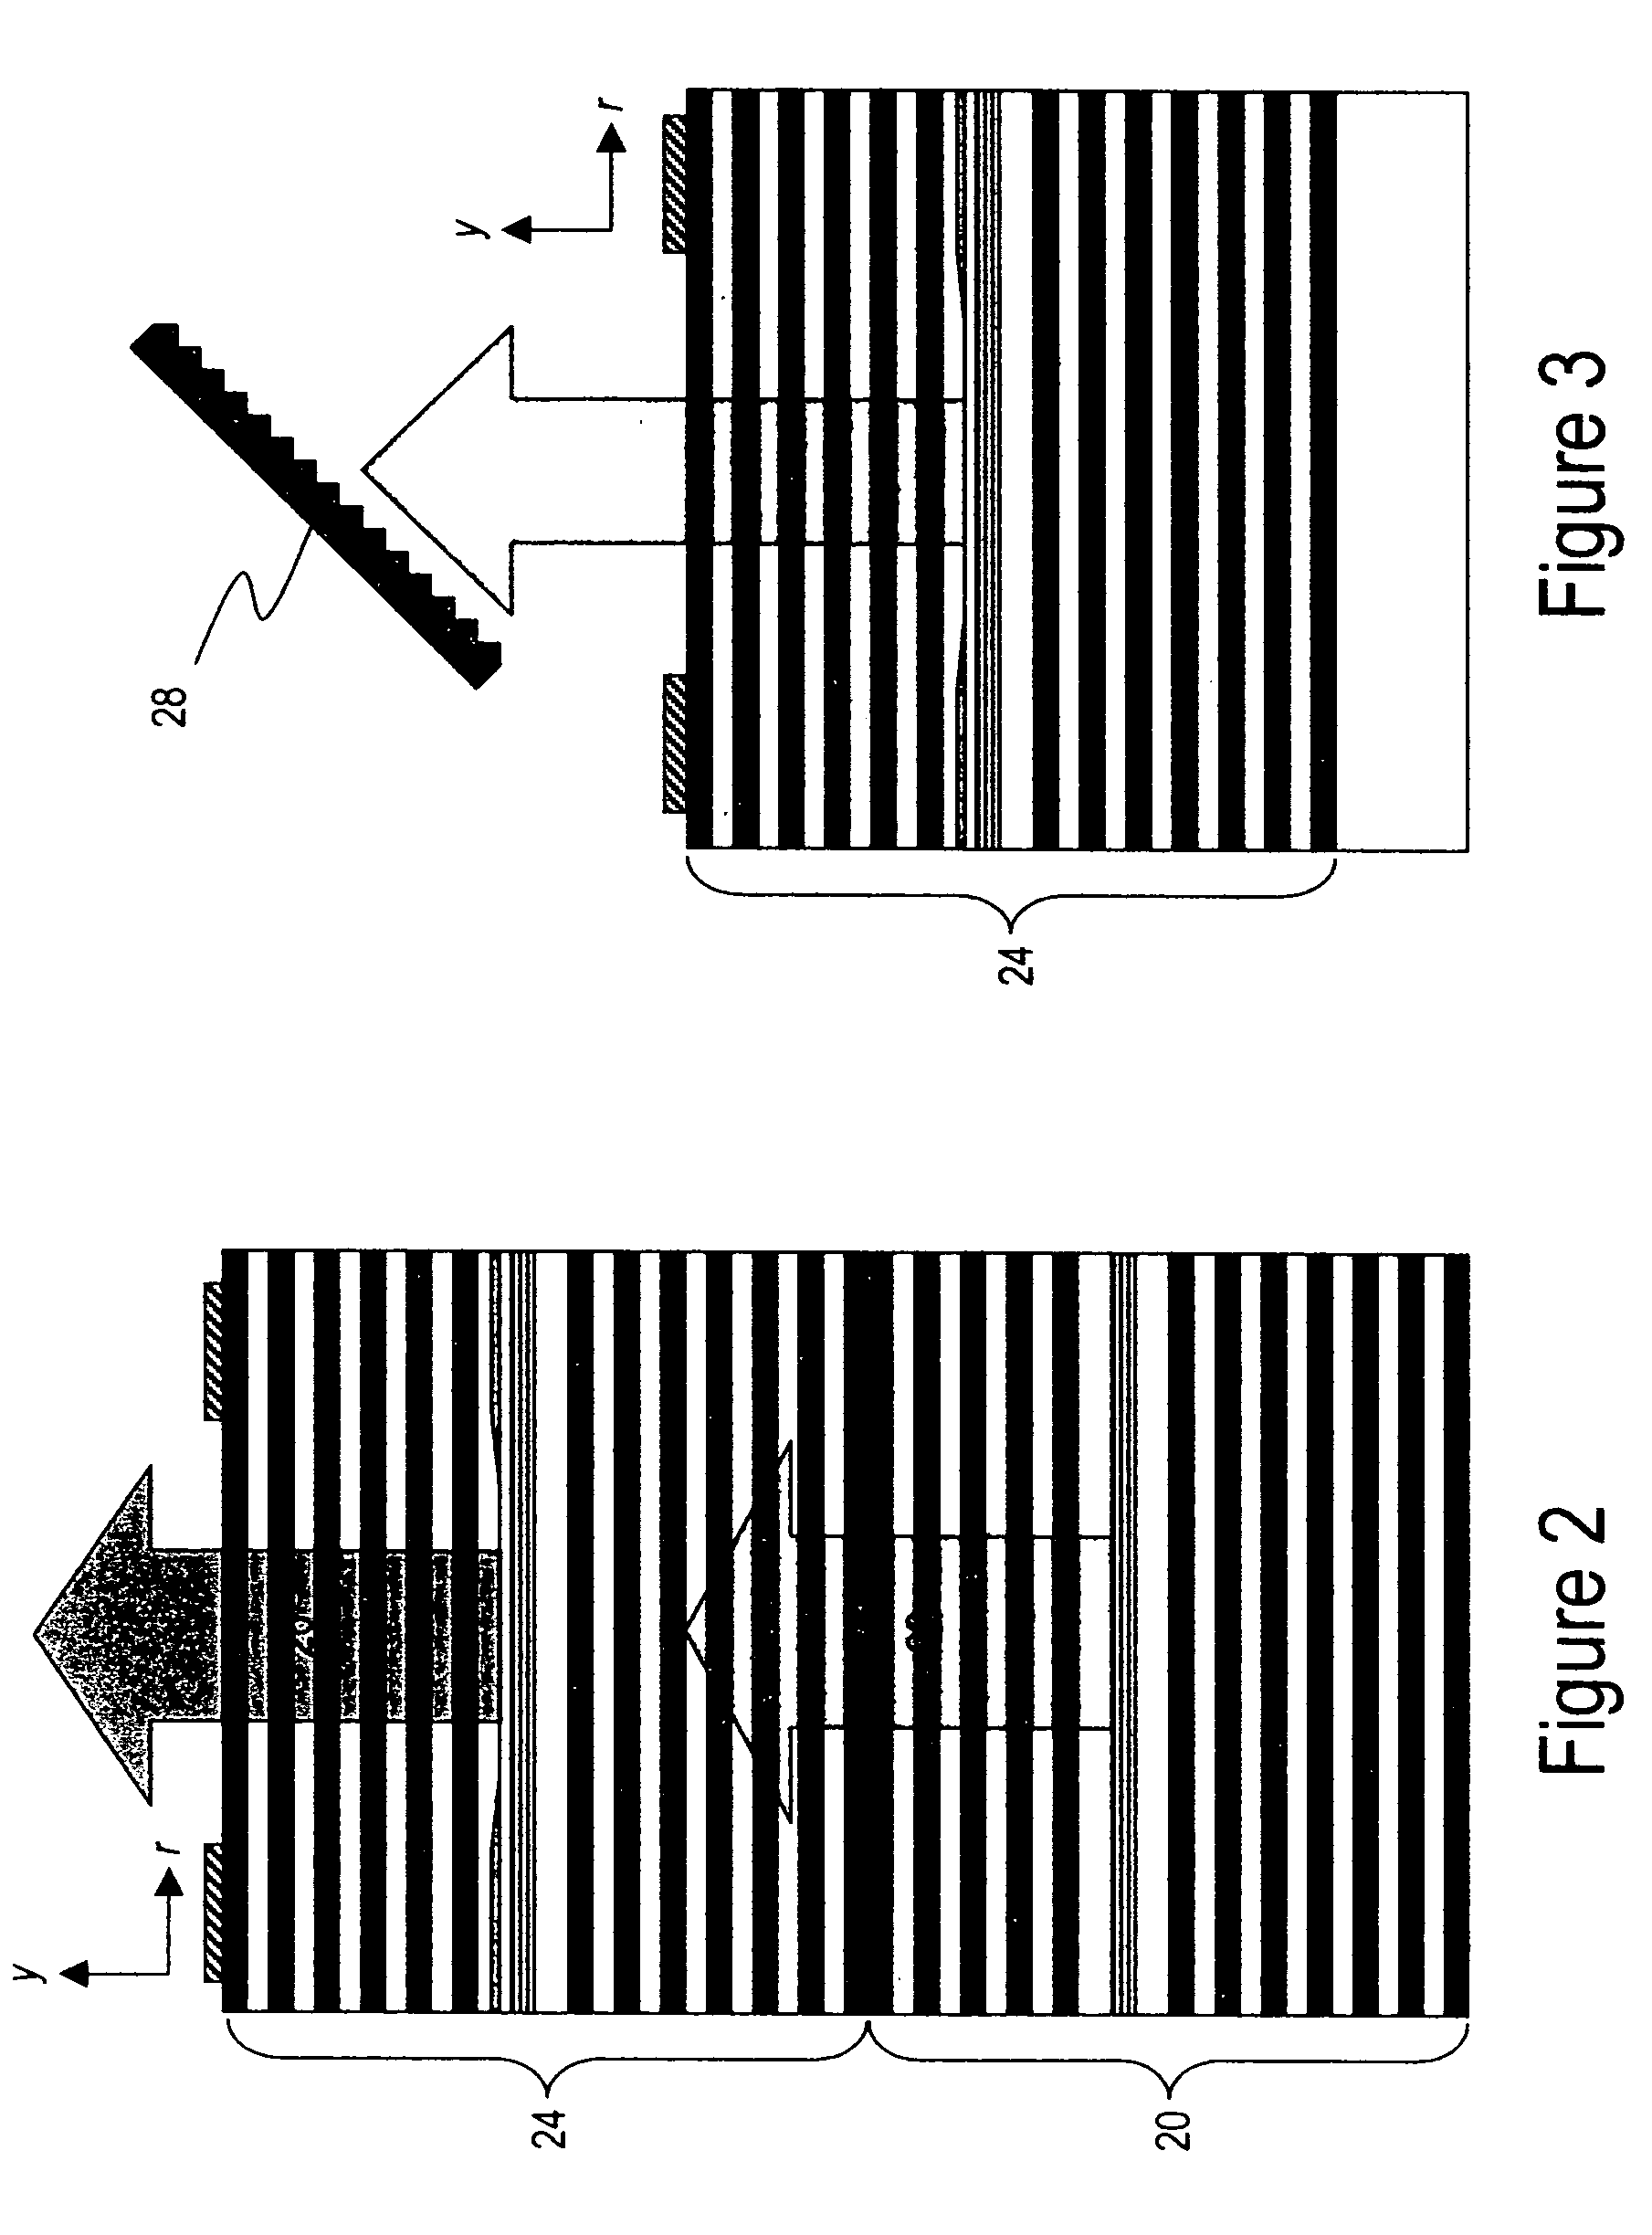 Planar waveguide surface emitting laser and photonic integrated circuit